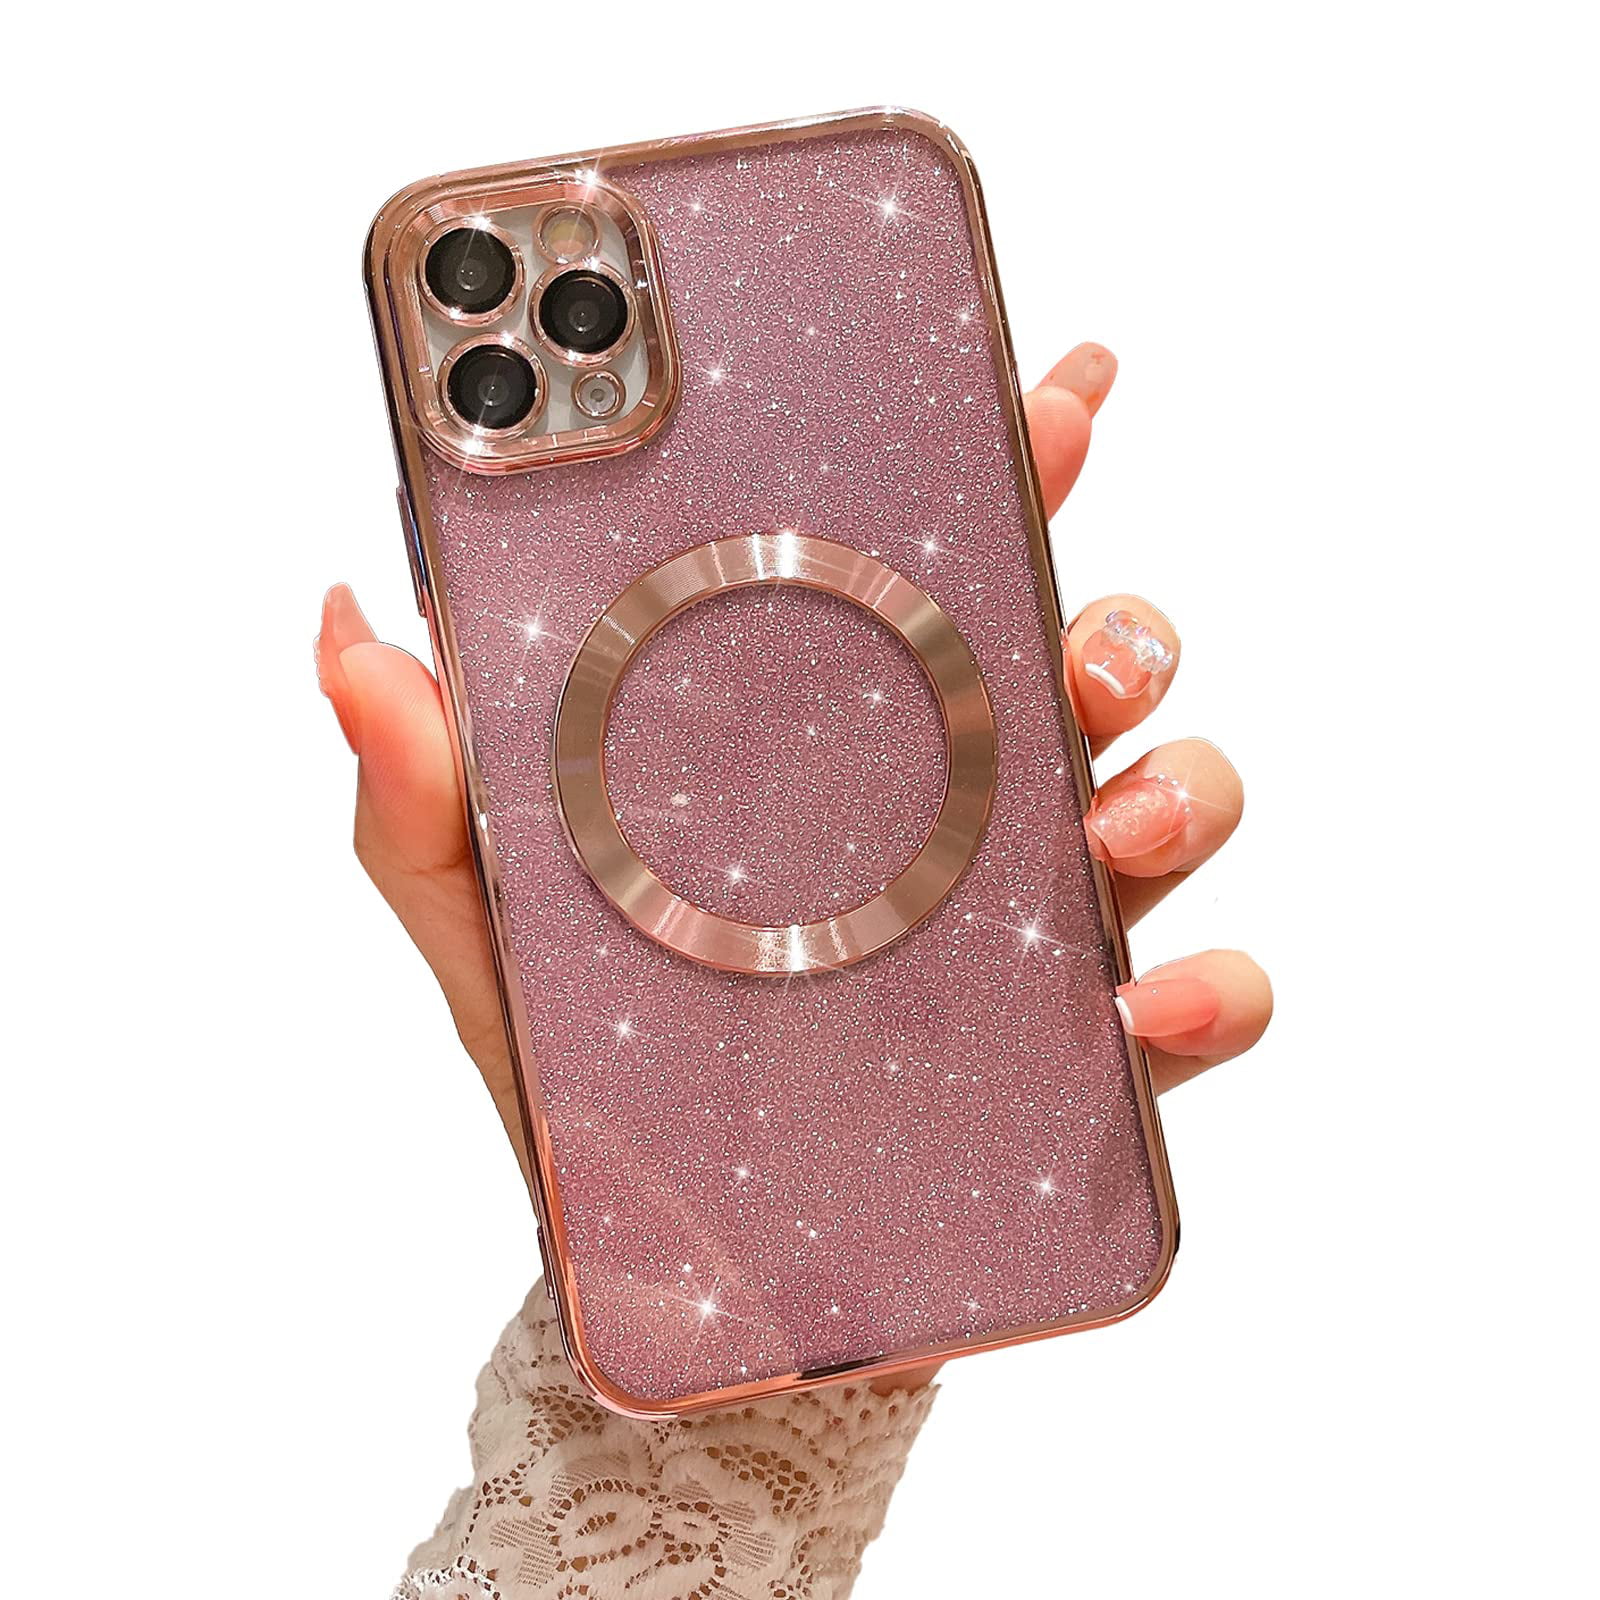 Dteck Luxury iPhone 11 Pro Max Cute Case for Women,Sparkle Plating